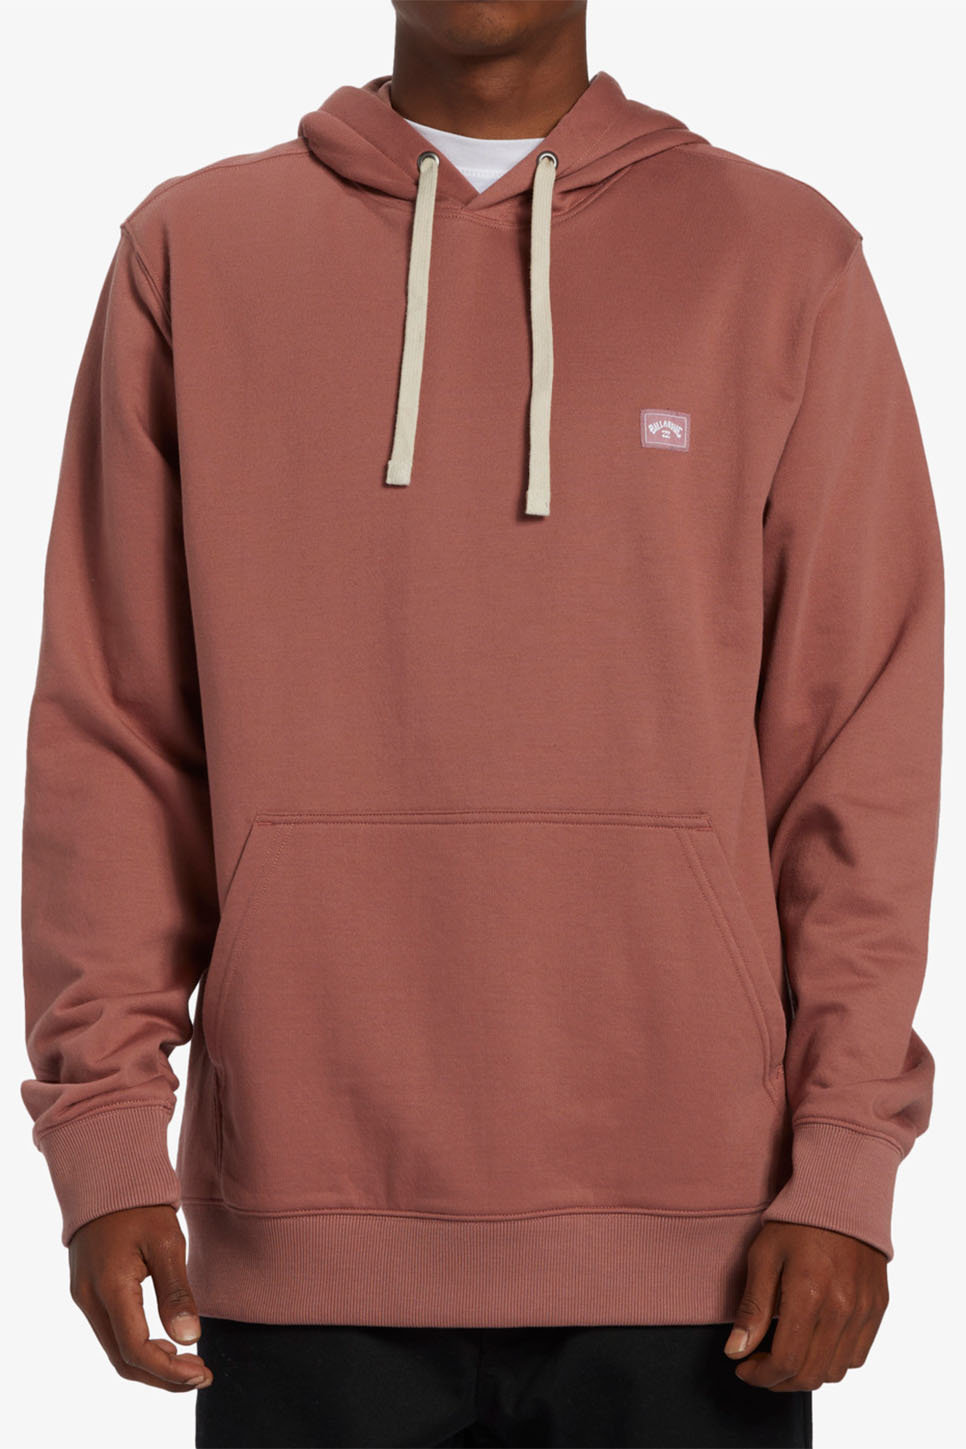 Billabong - All Day PO Hoodie - Rosewood - Front